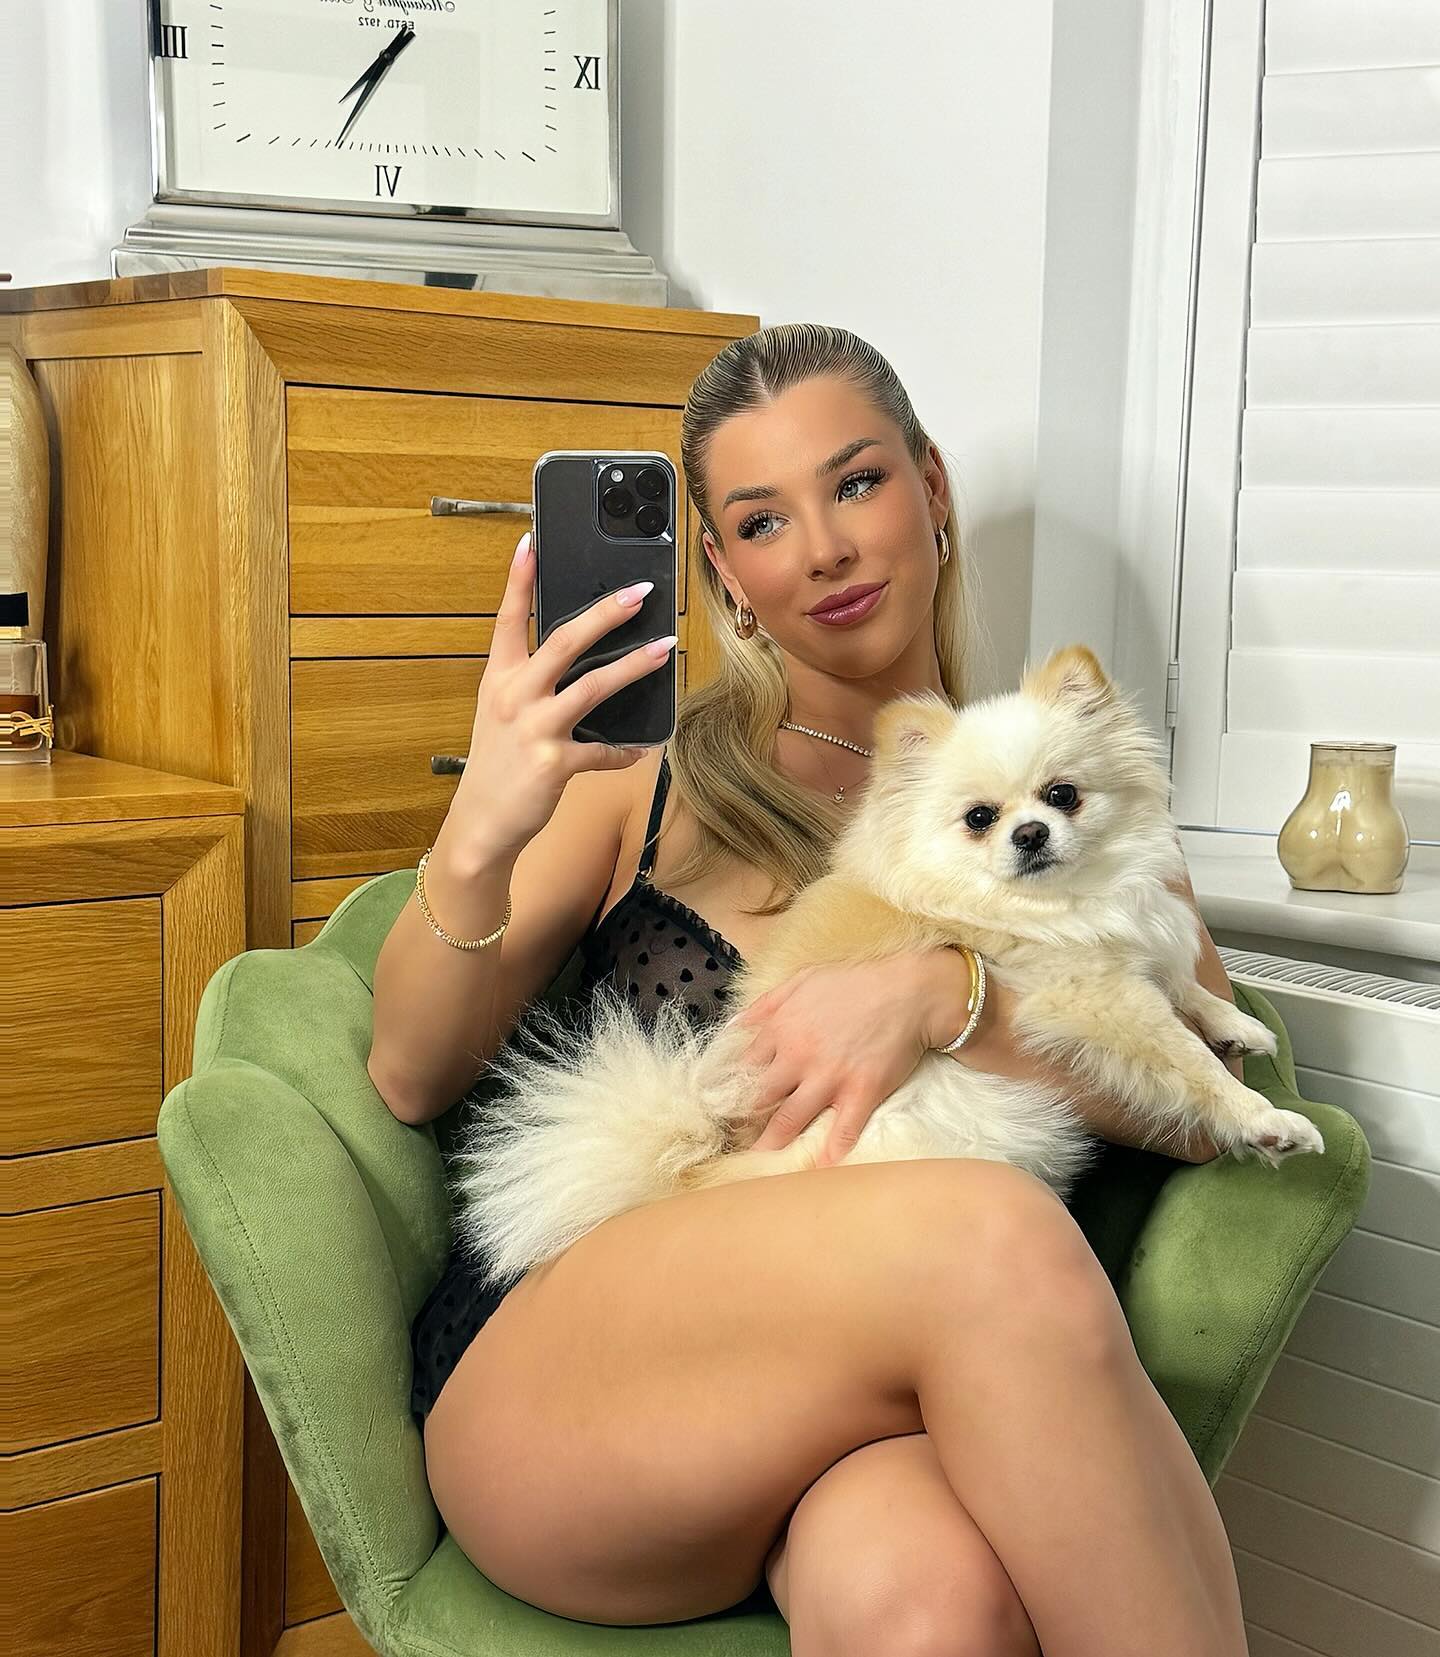 Wright posed with her pet dog last month